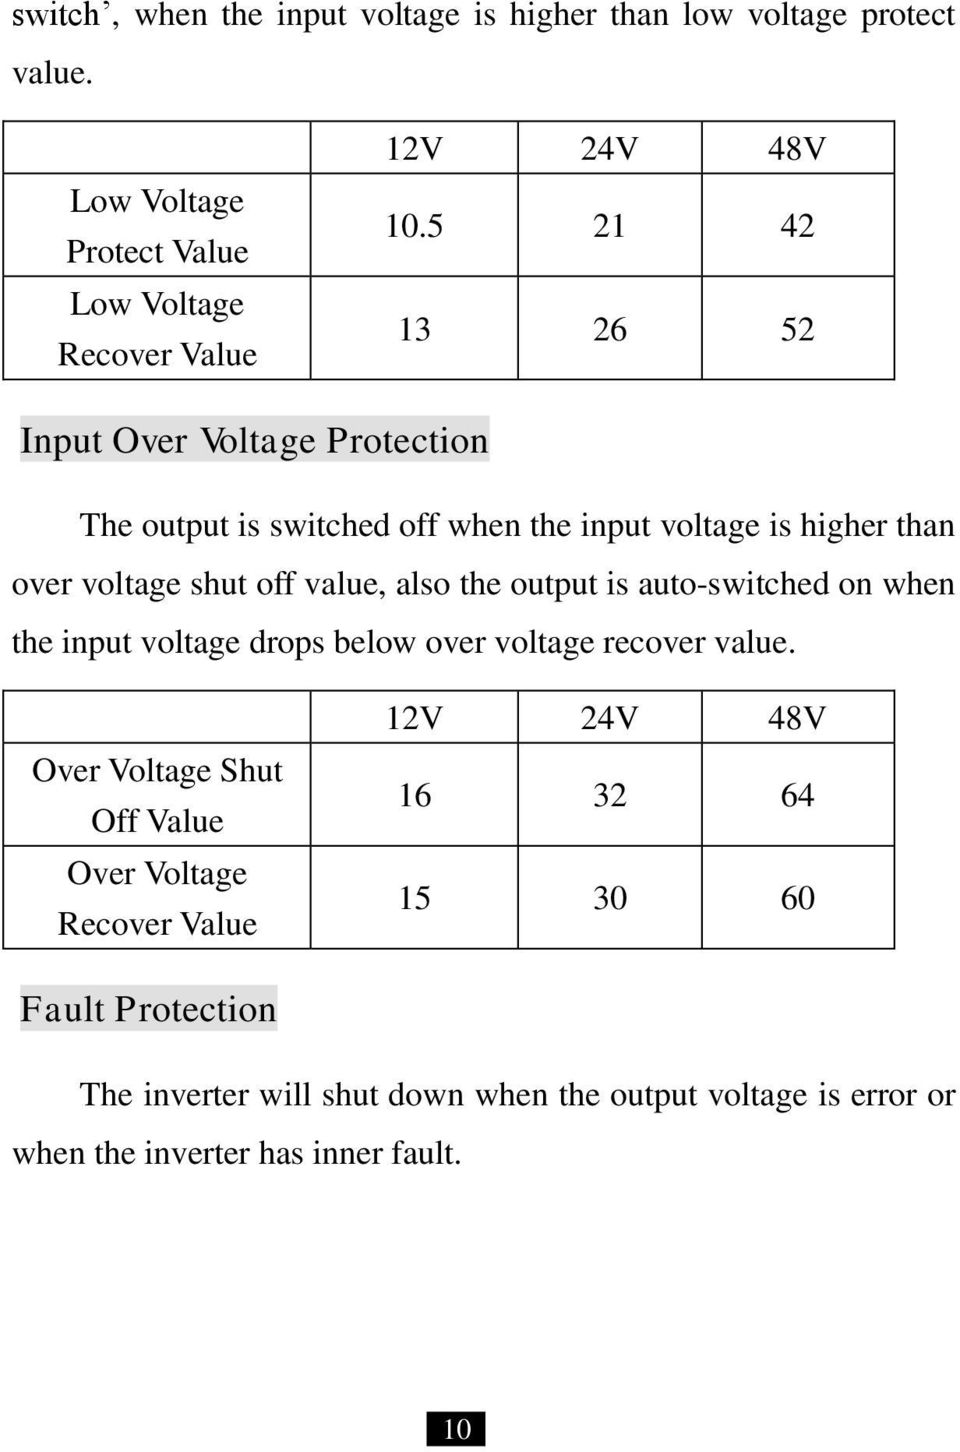 the output is auto-switched on when the input voltage drops below over voltage recover value.